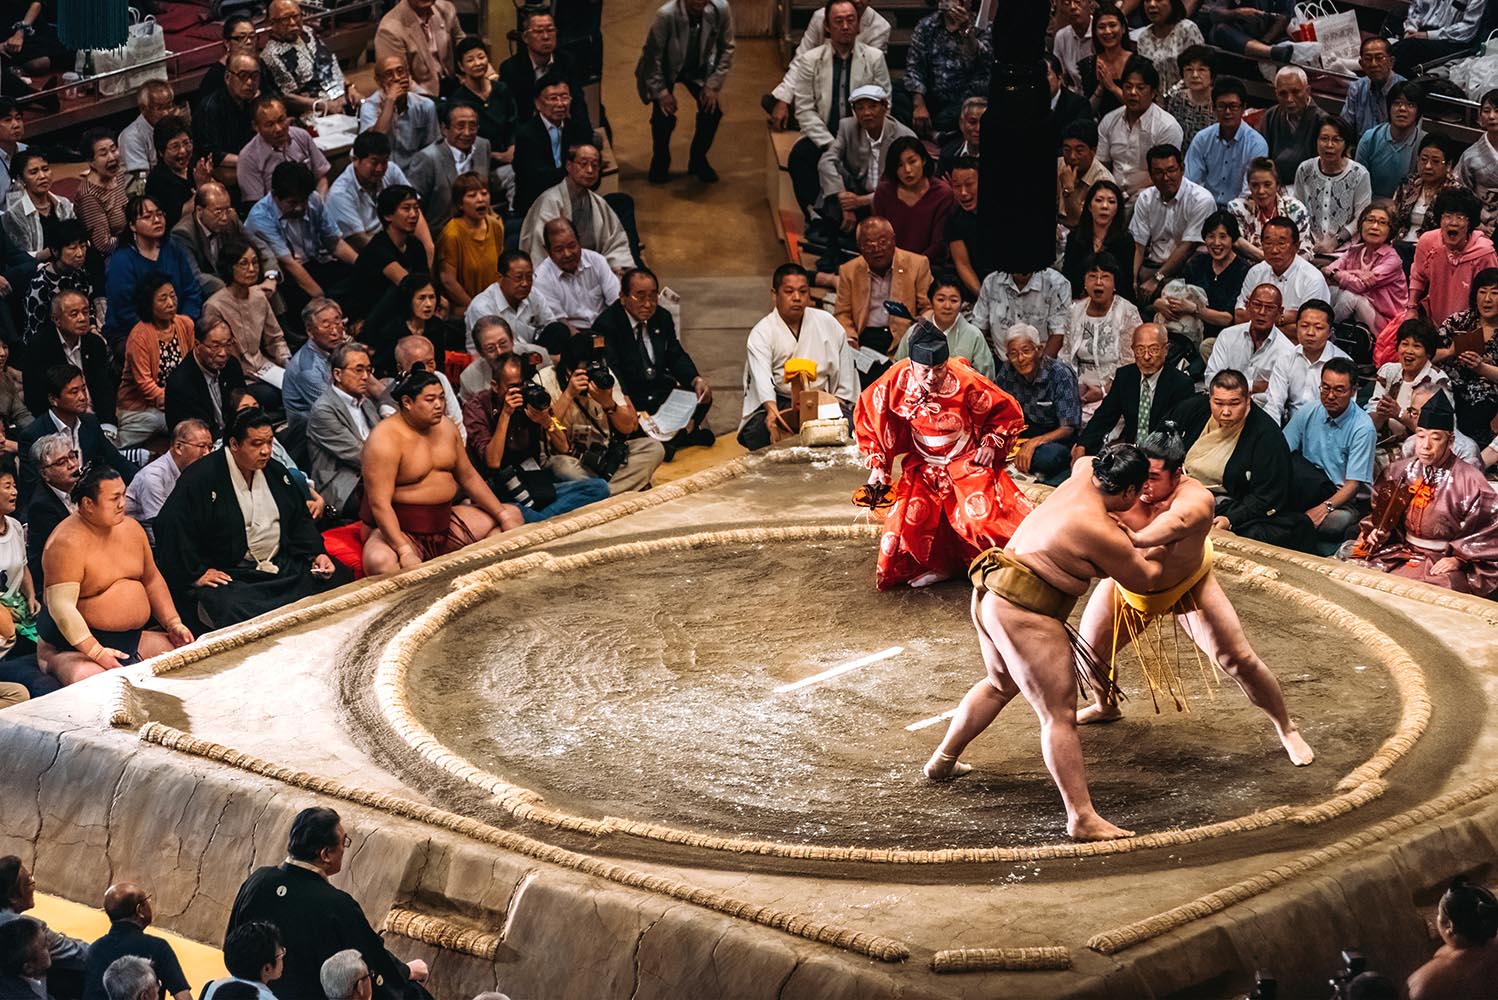 Arena for traditional Sumo wrestling in Tokyo, Japan